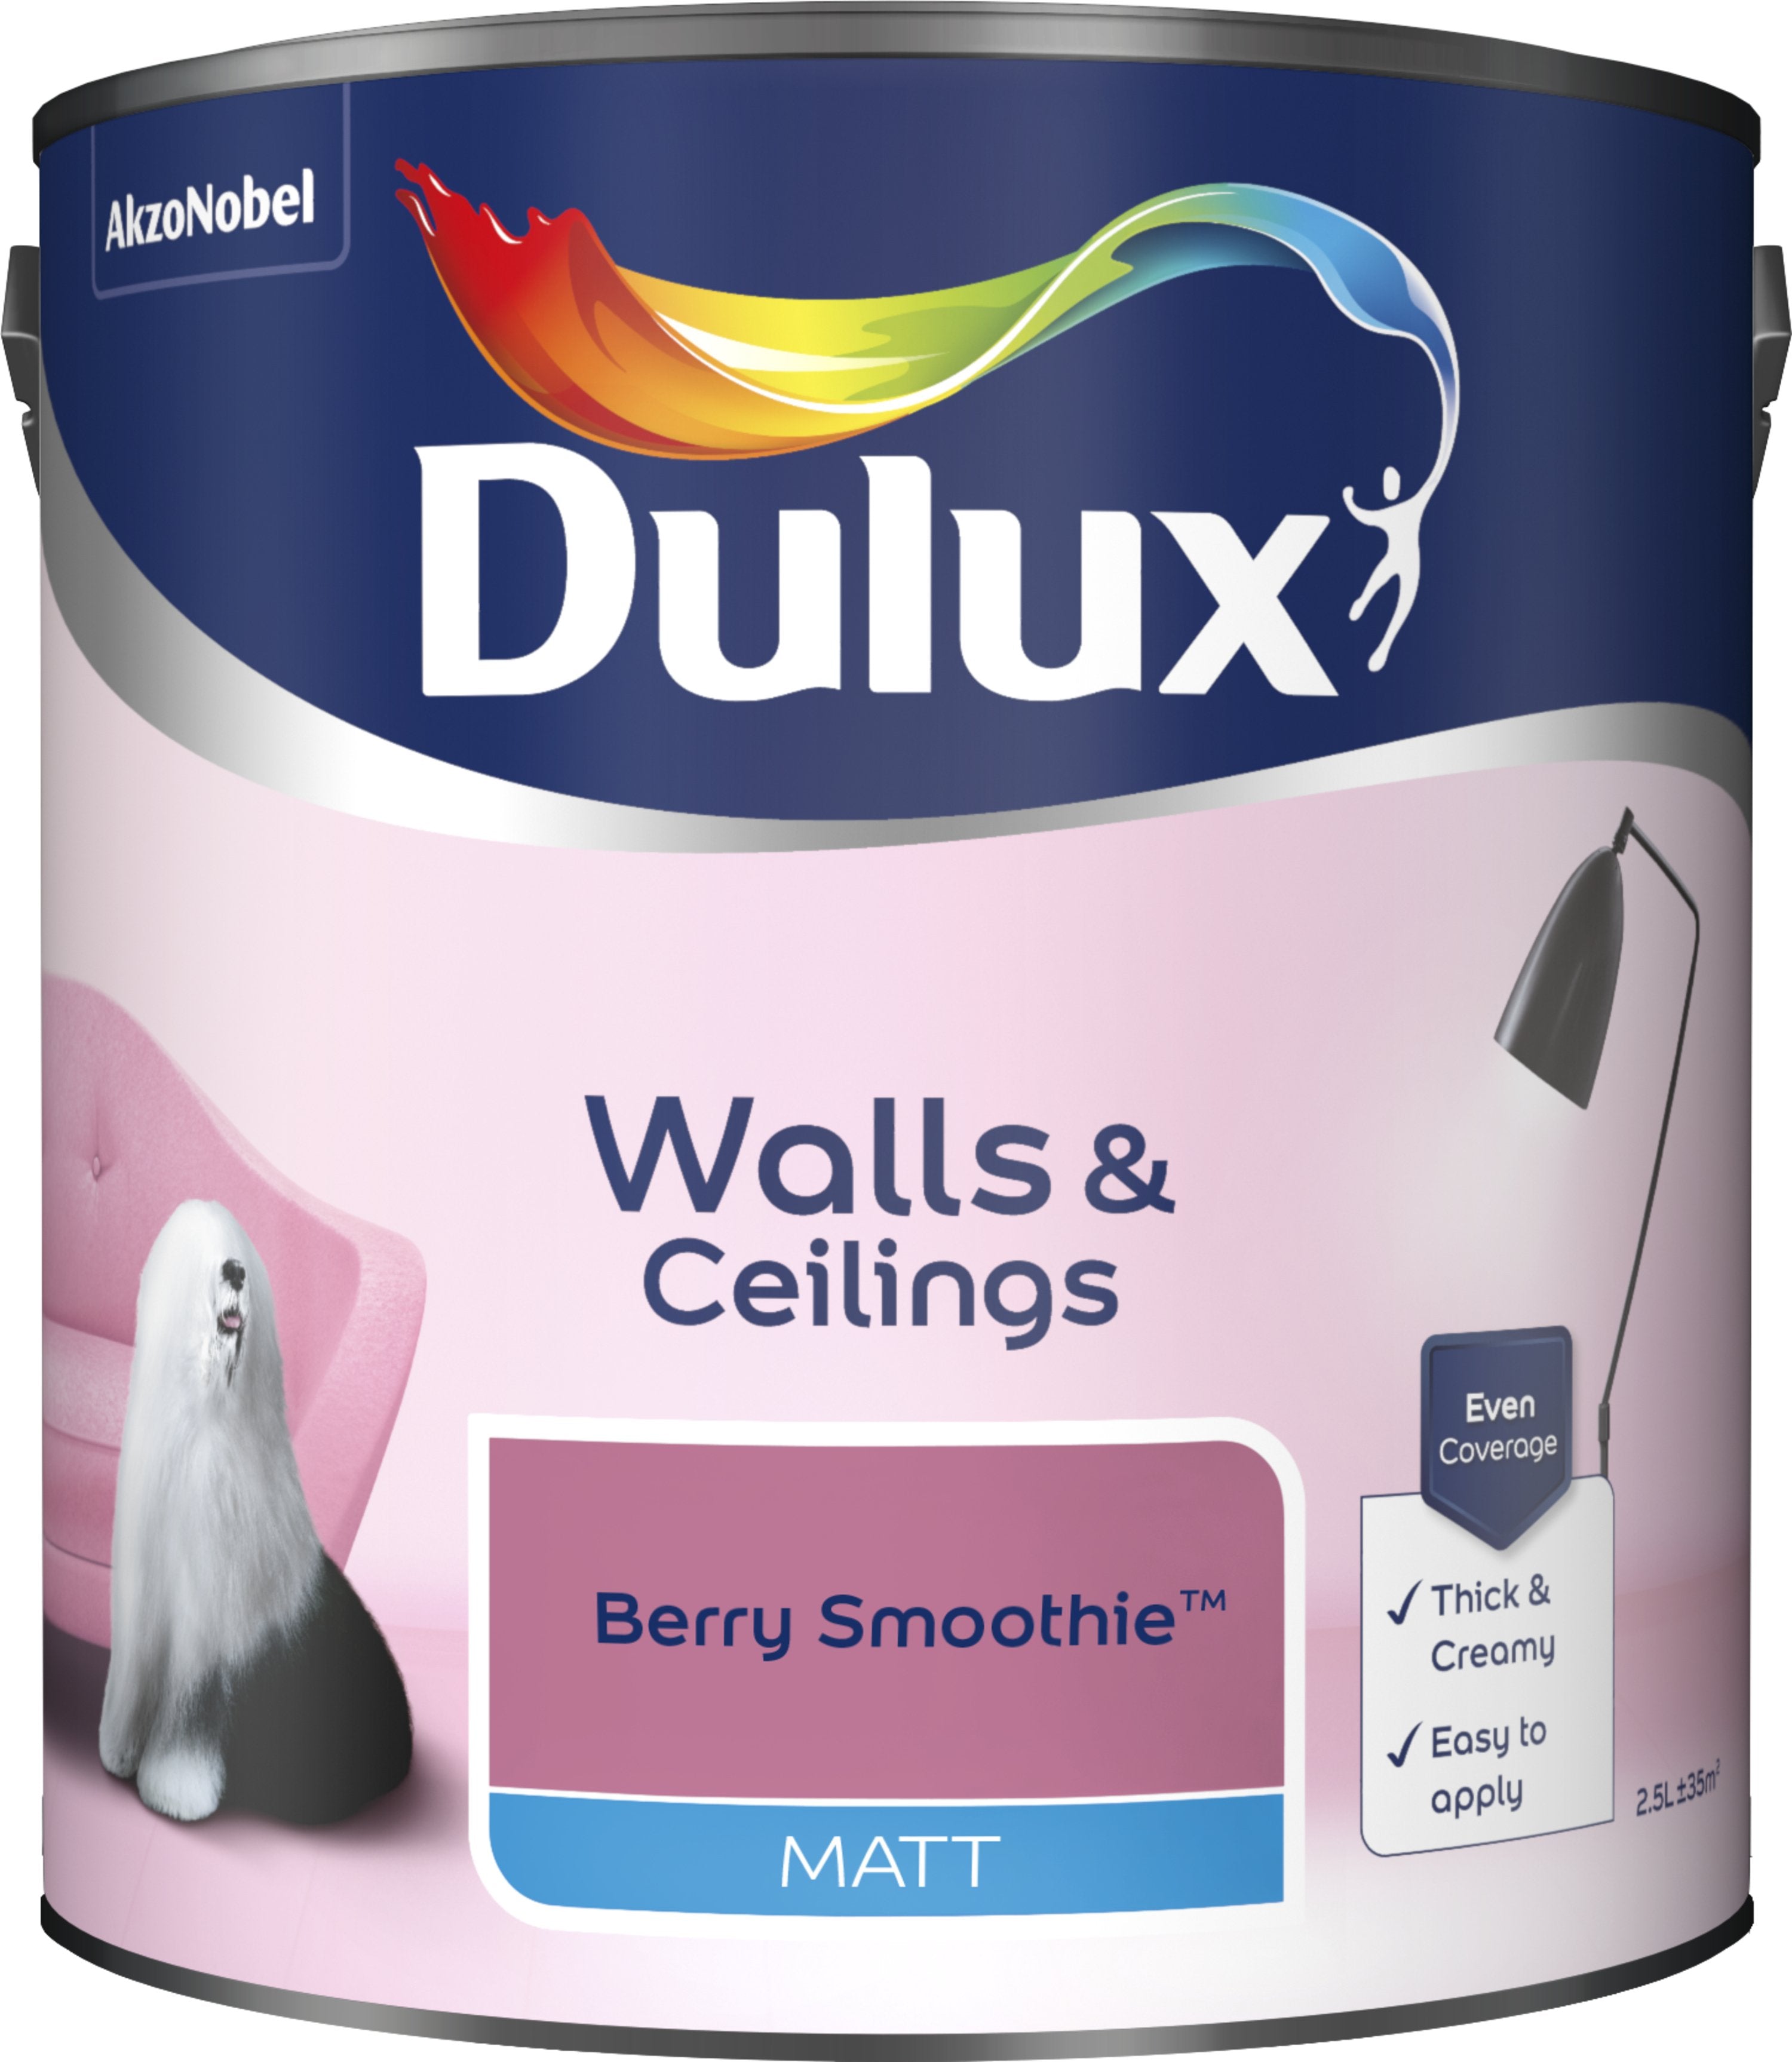 Dulux Matt Emulsion Paint For Walls And Ceilings - Berry Smoothie 2.5L Garden & Diy  Home